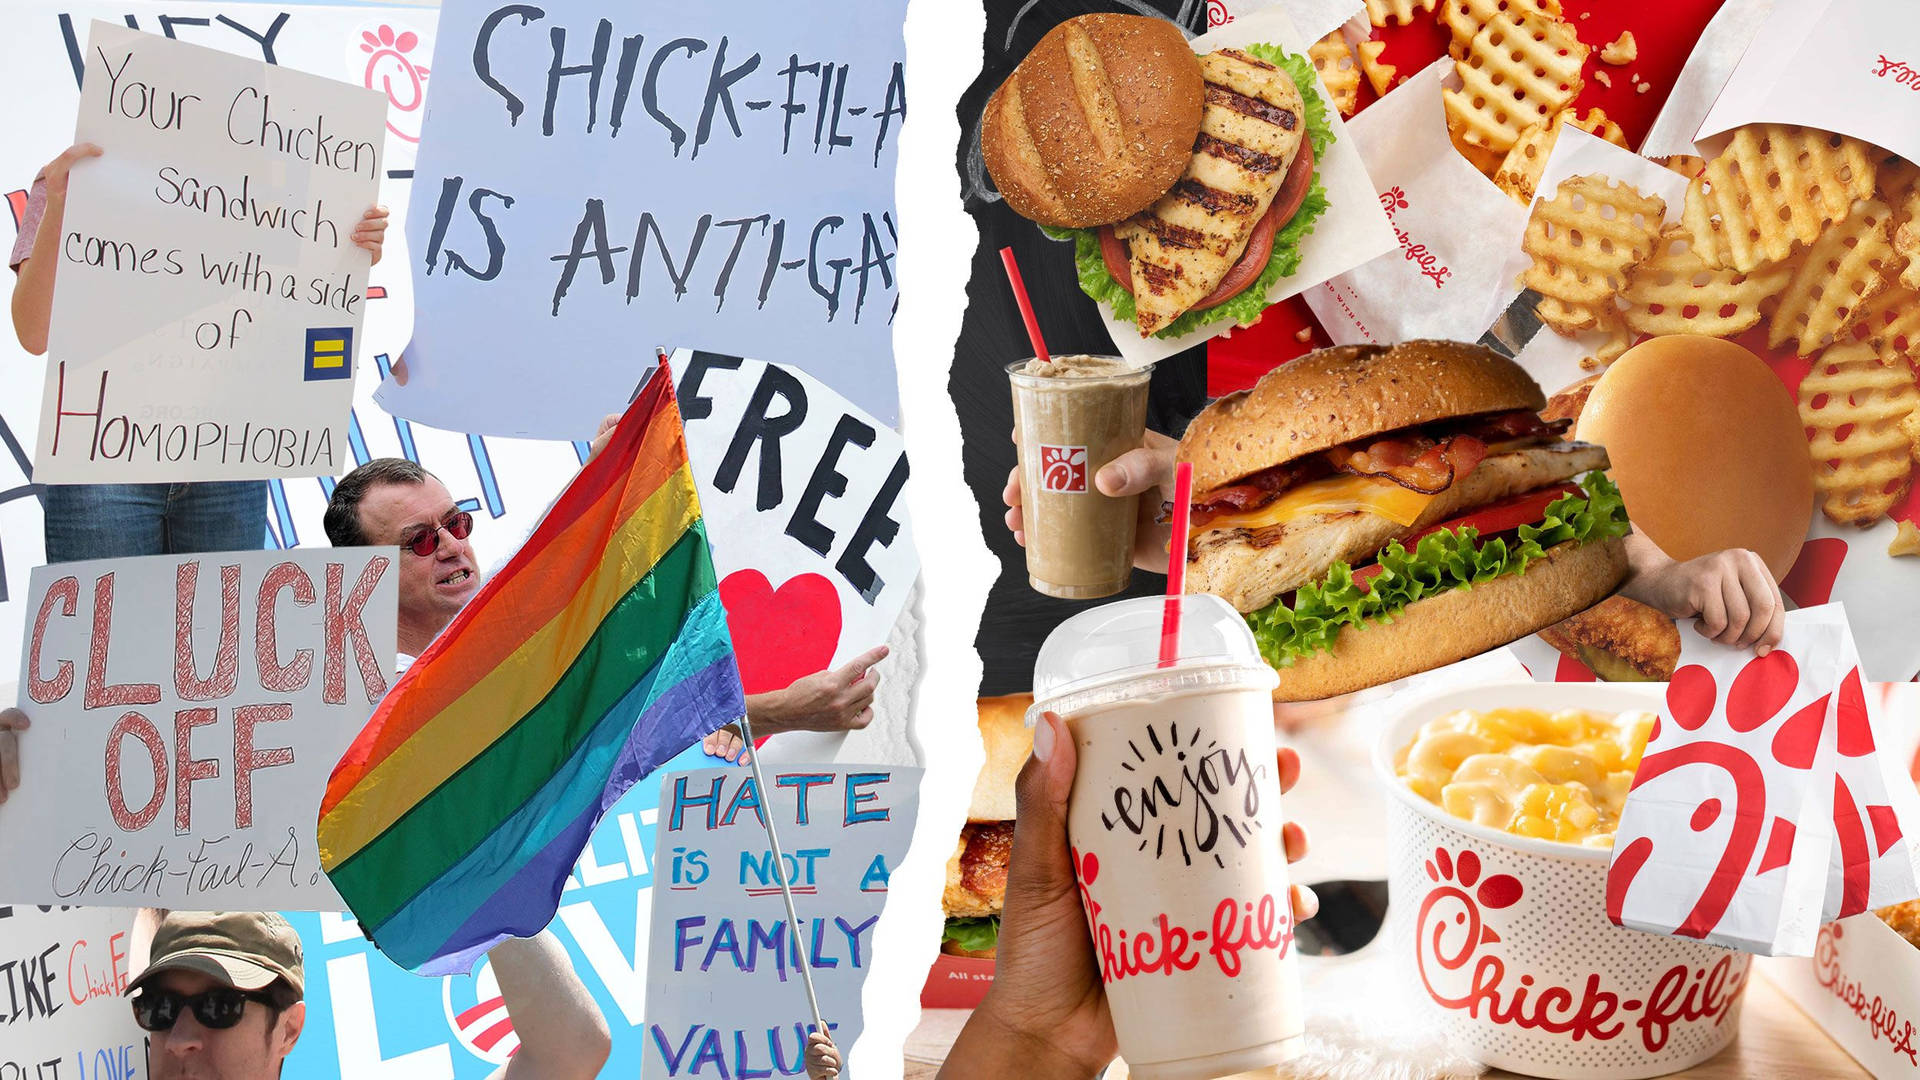 The Never-ending Chick-fil-a Controversy That Sparked Heated Debates. Background